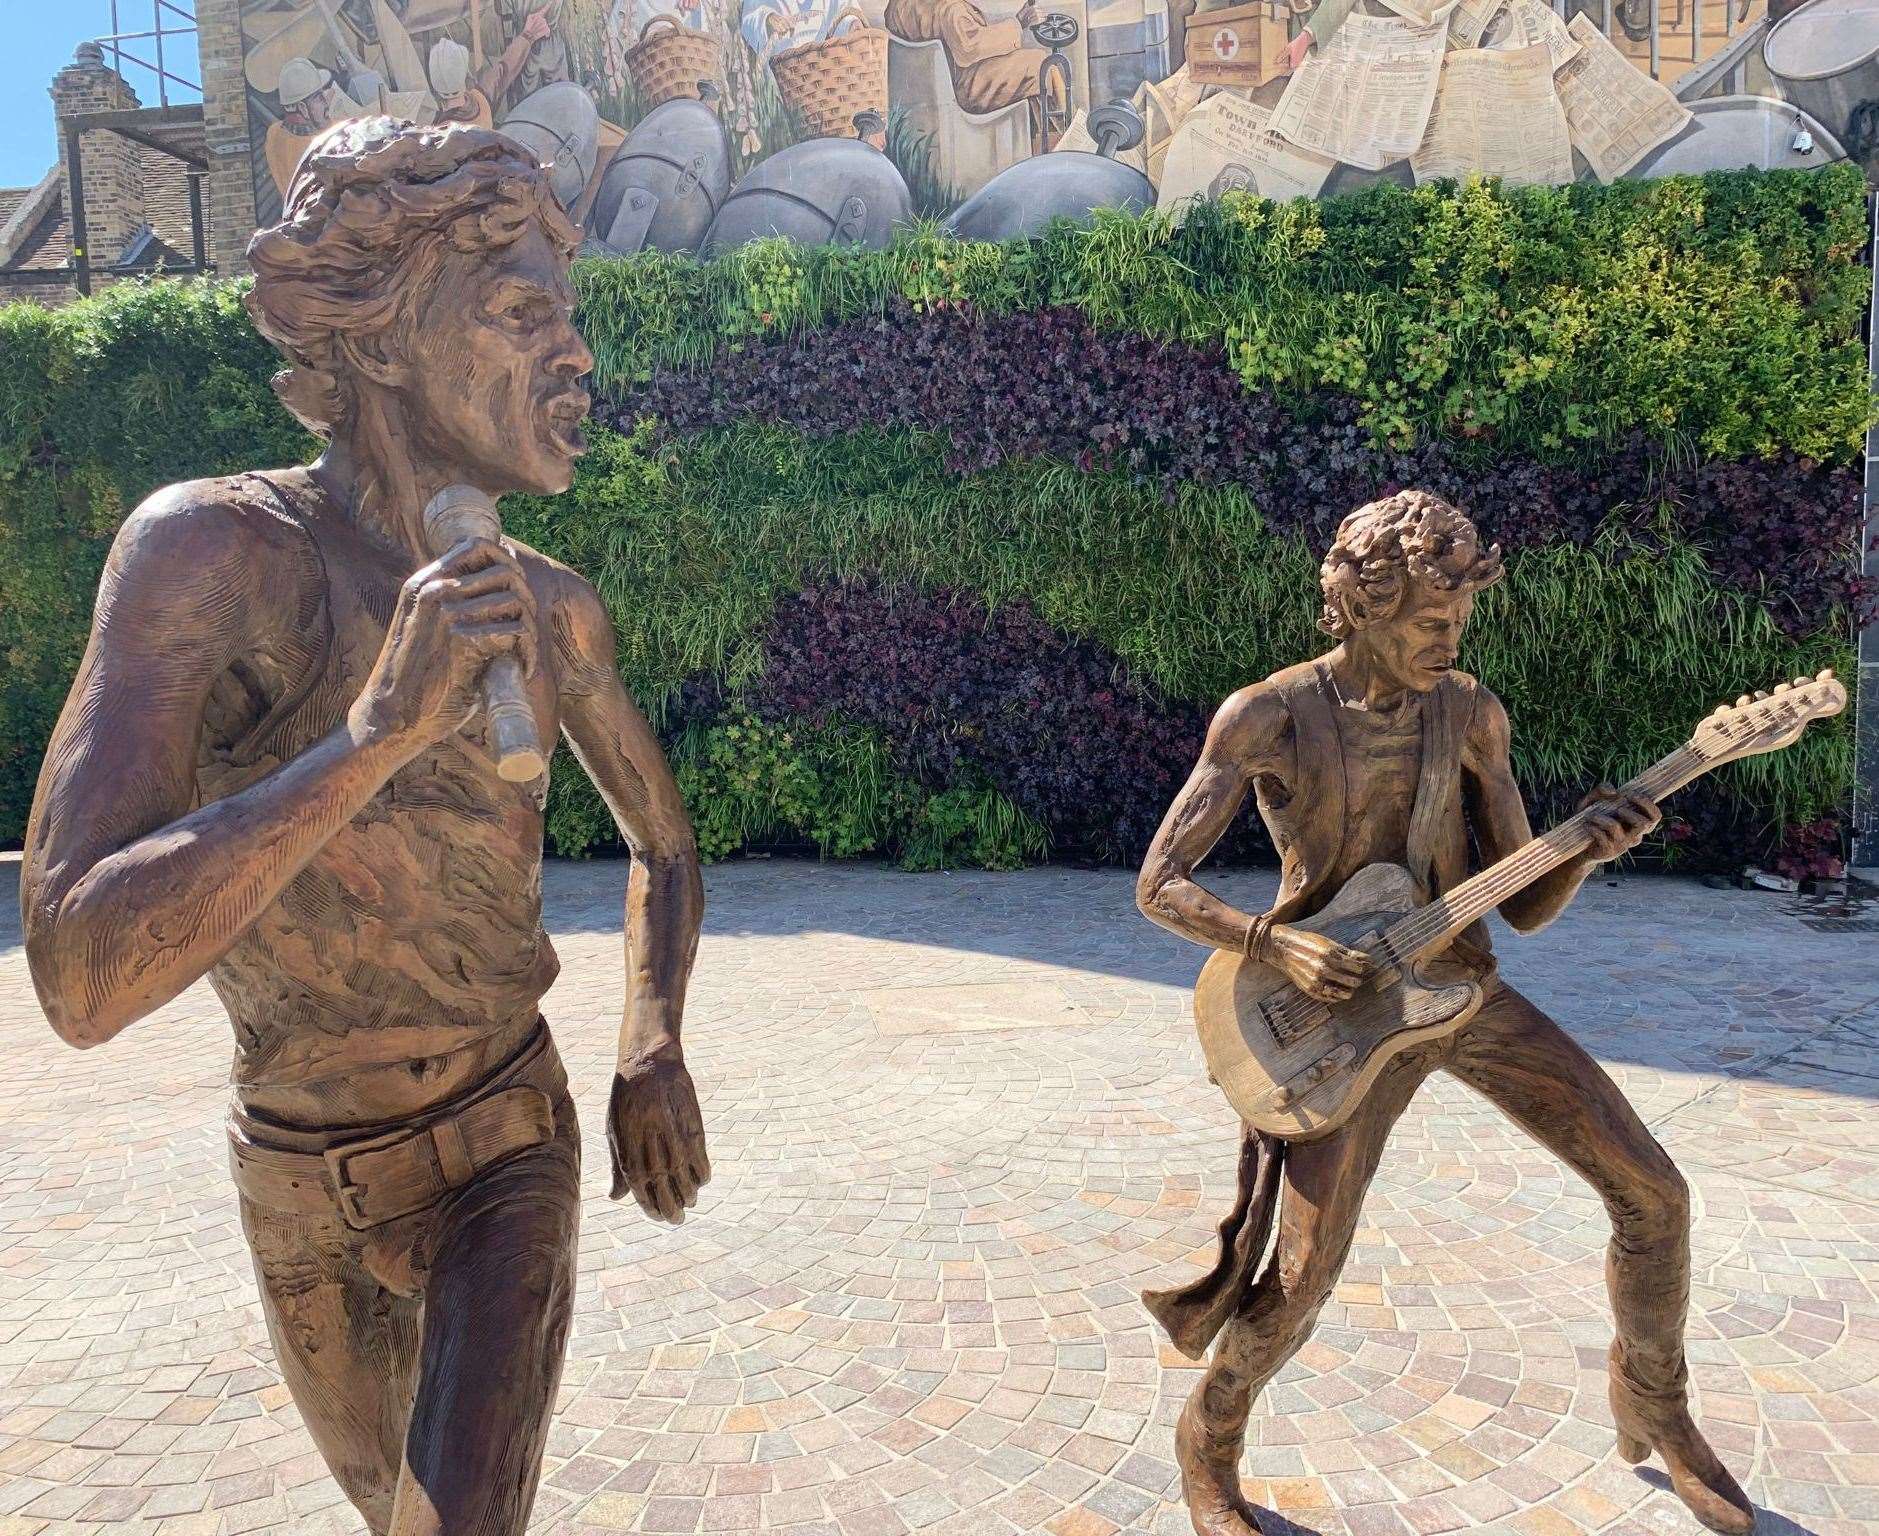 The Glimmer Twins, Mick Jagger and Keith Richards, statues in Dartford High Street. Picture: Dartford Borough Council/ Andy Barnes Photography